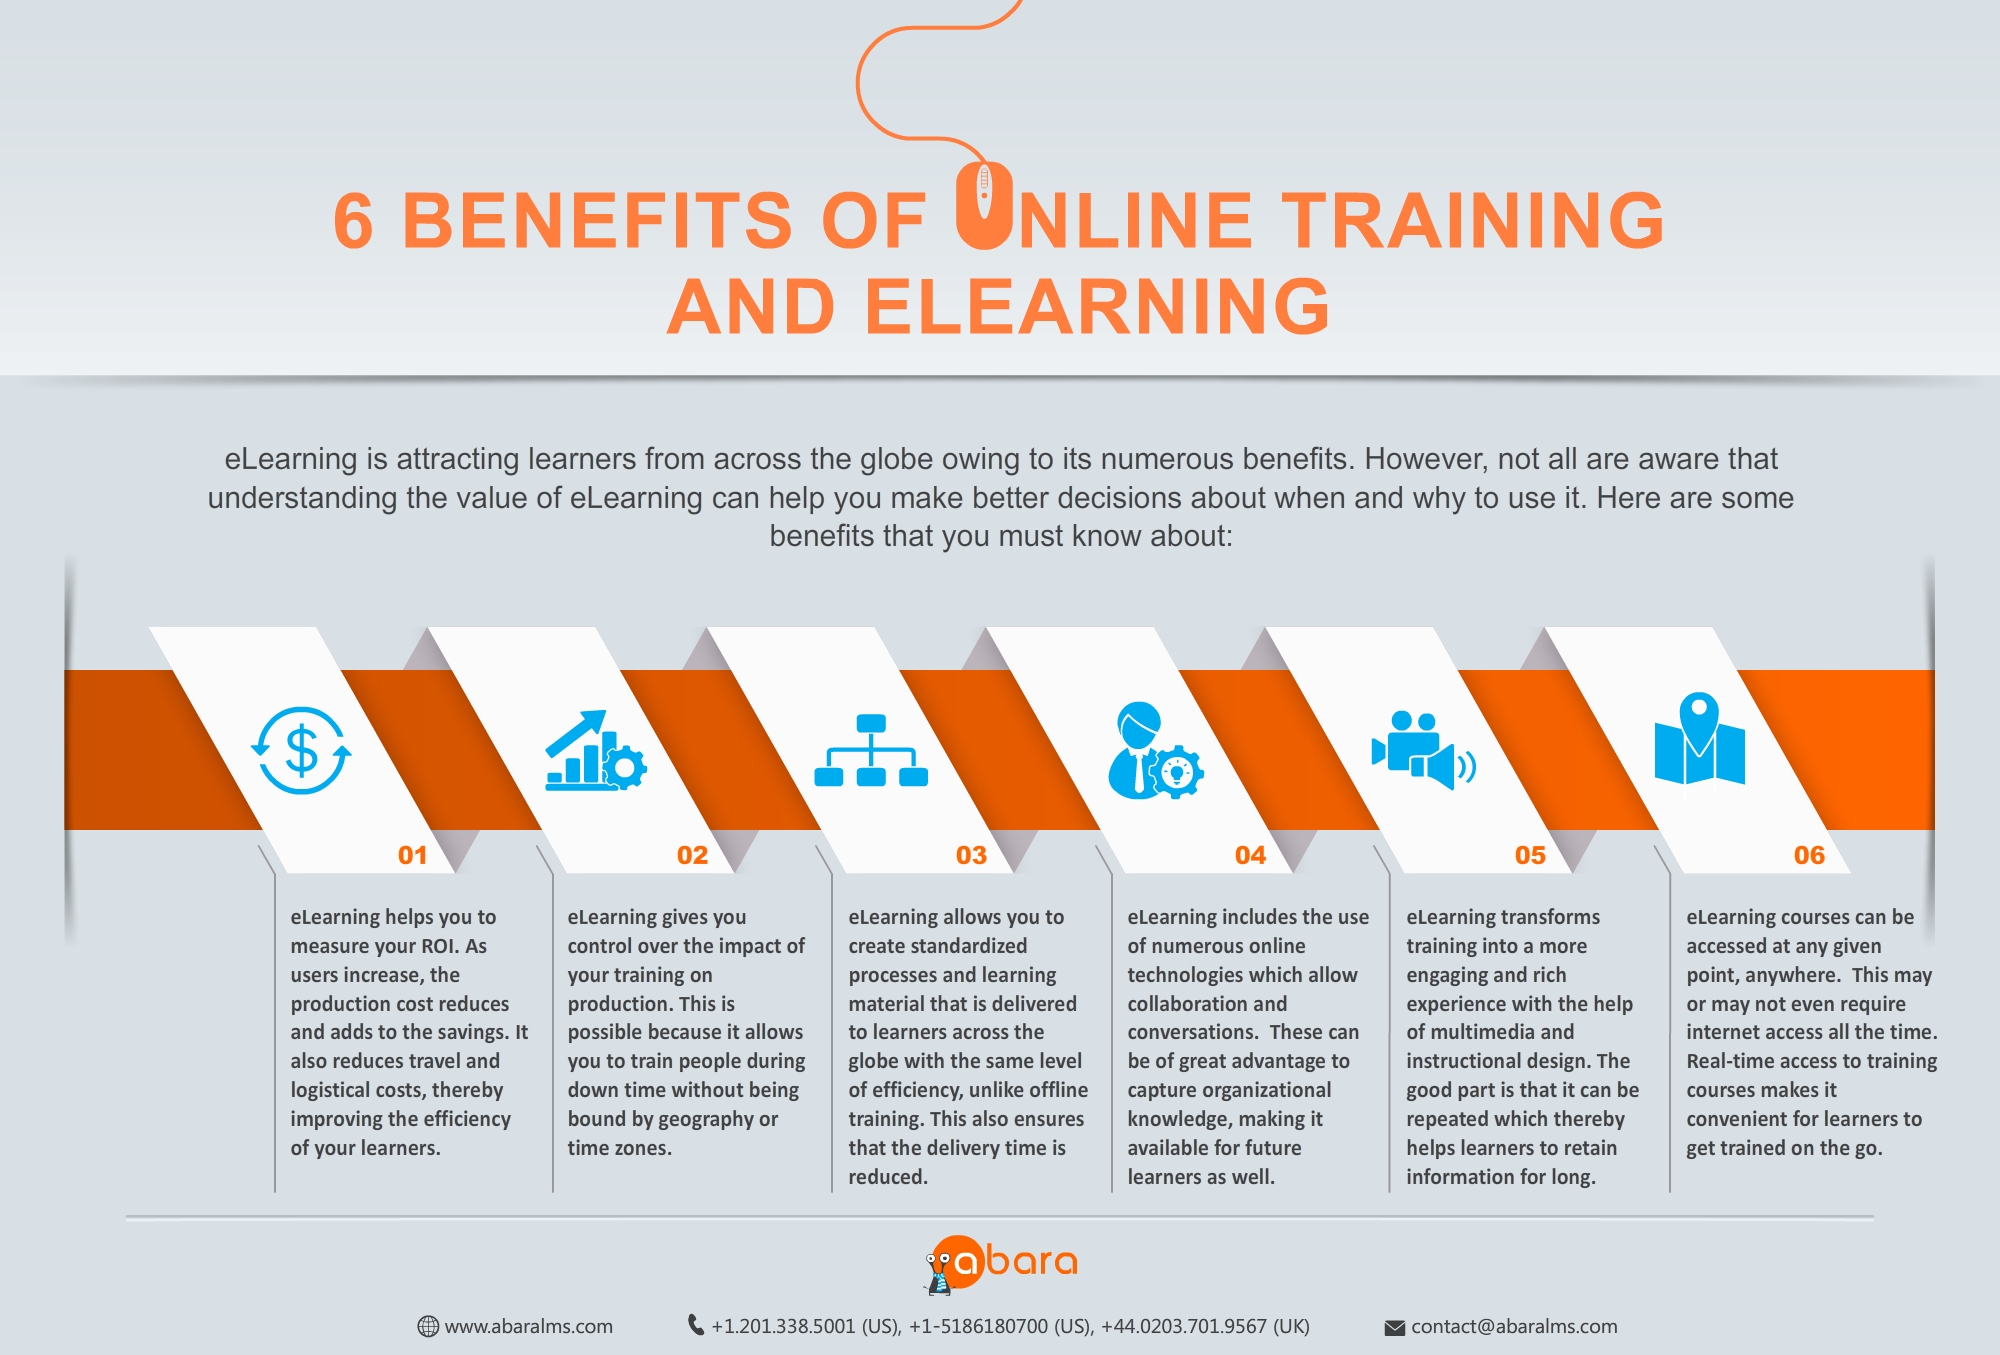 6 benefits of online training and elearning